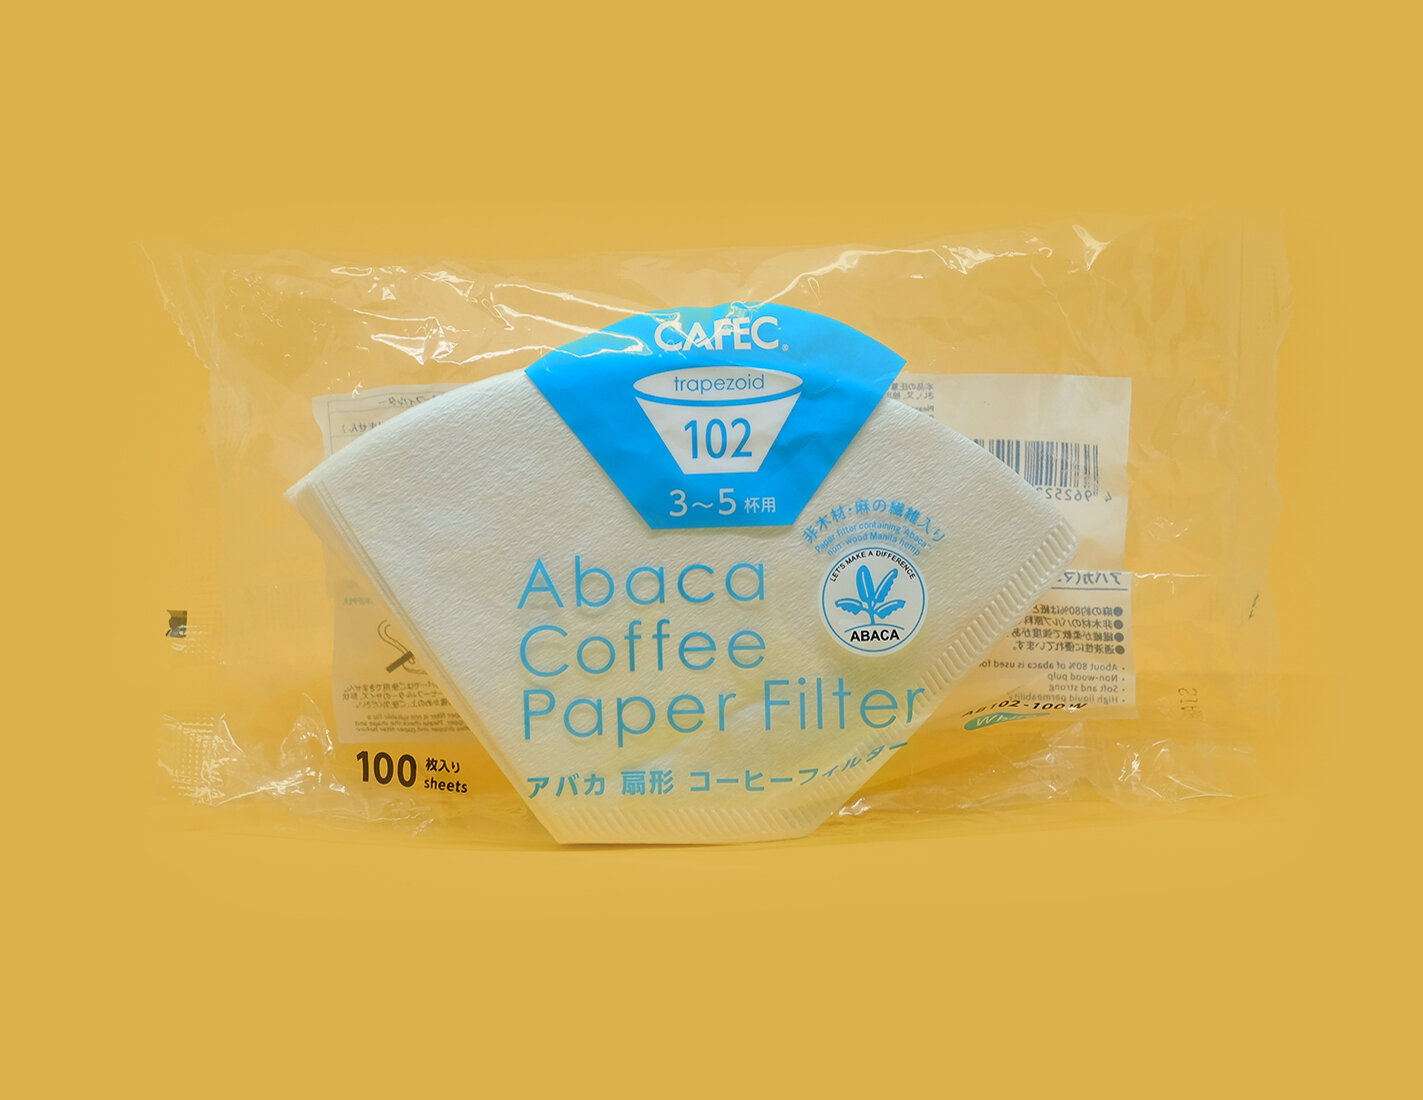 FILTER PAPER, PRODUCTS, CAFEC - SANYO SANGYO